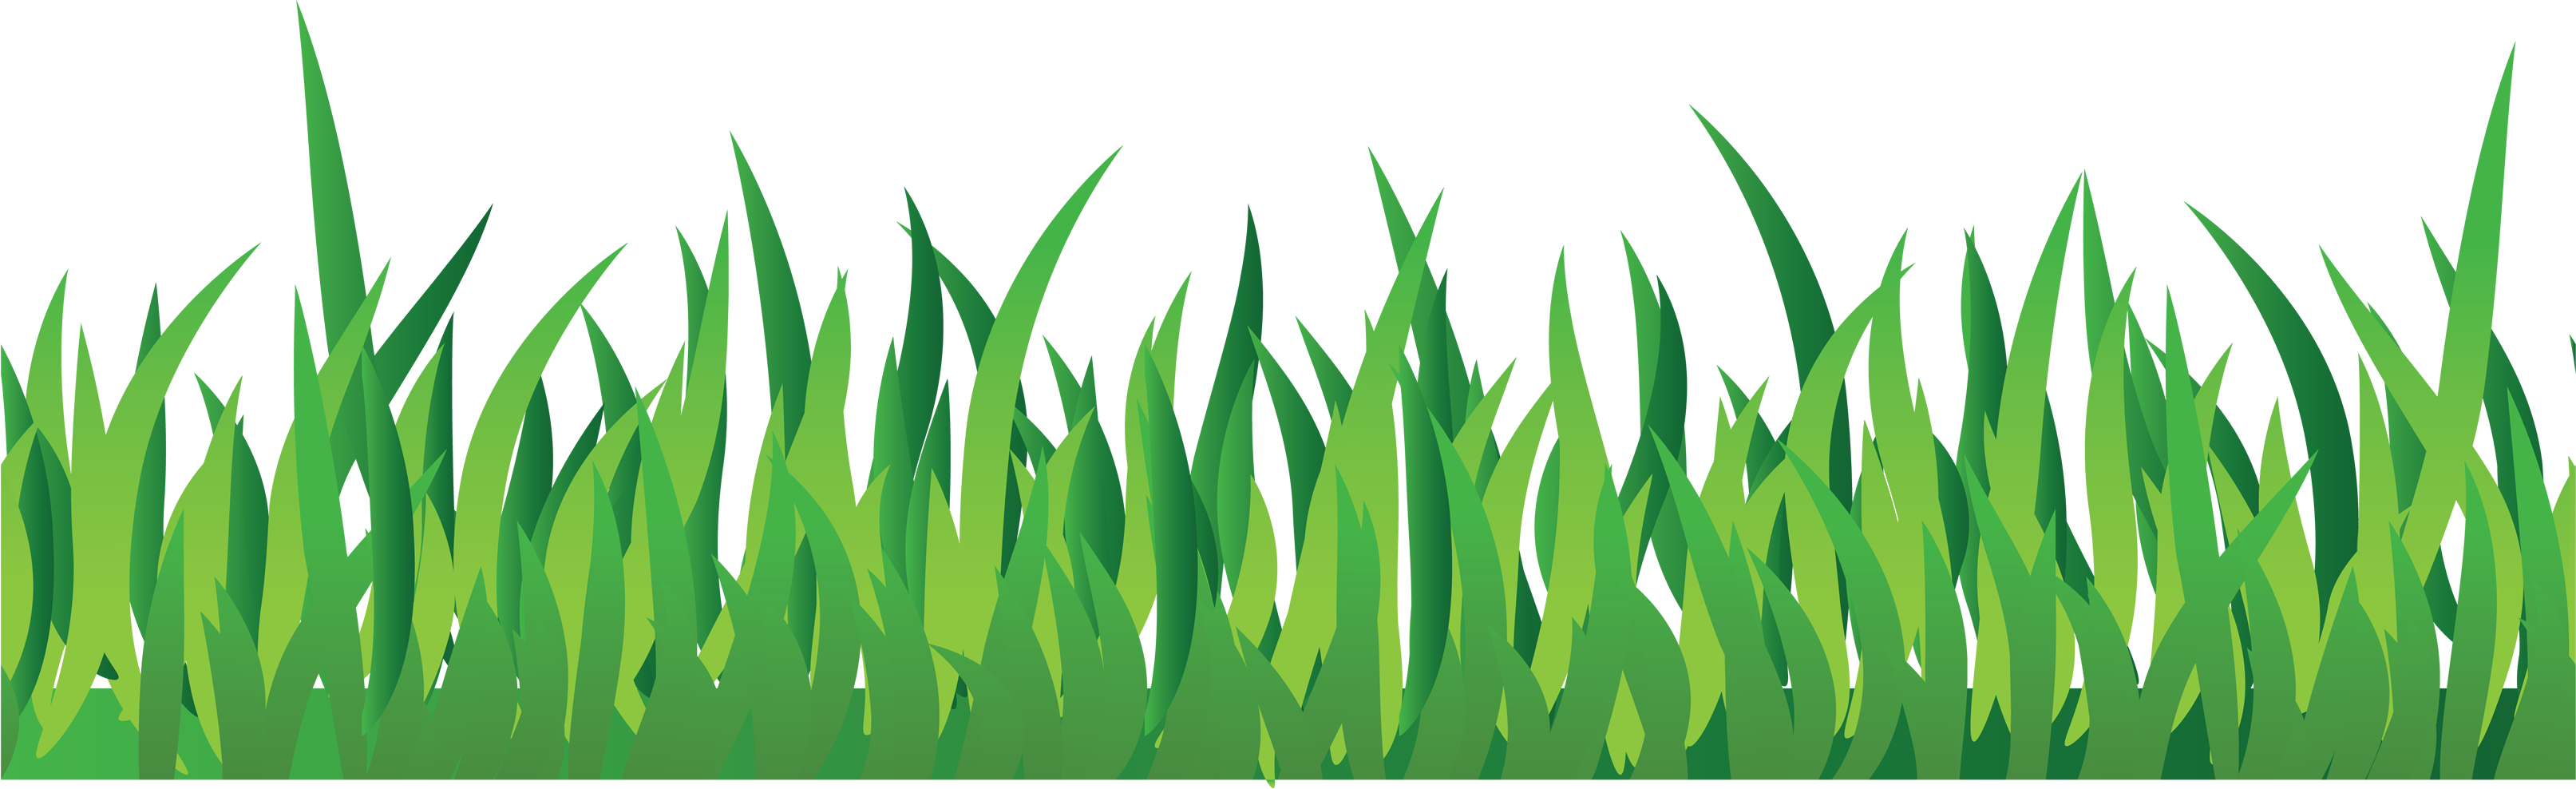 Grass In PNG | Web Icons PNG